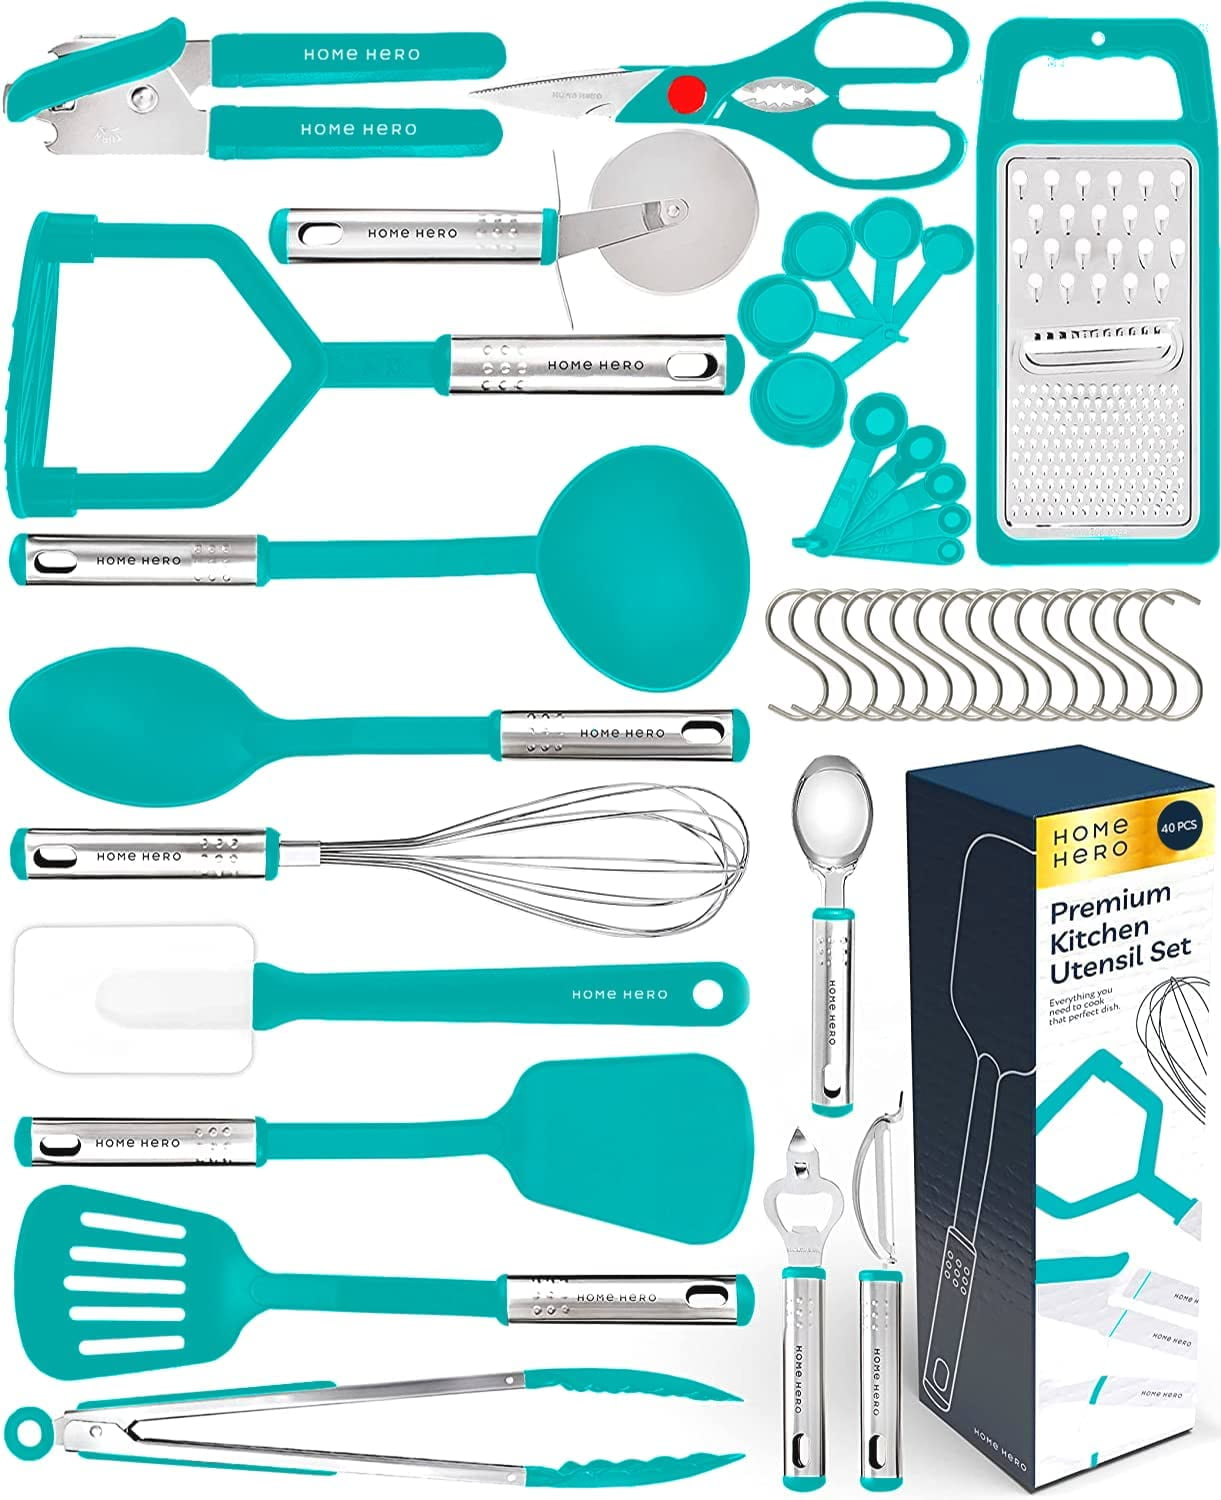 Kaluns Kitchen Utensils Set, 24 Piece Nylon And Stainless Steel Cooking  Utensils, Dishwasher Safe And Heat Resistant Kitchen Tools, Red : Target